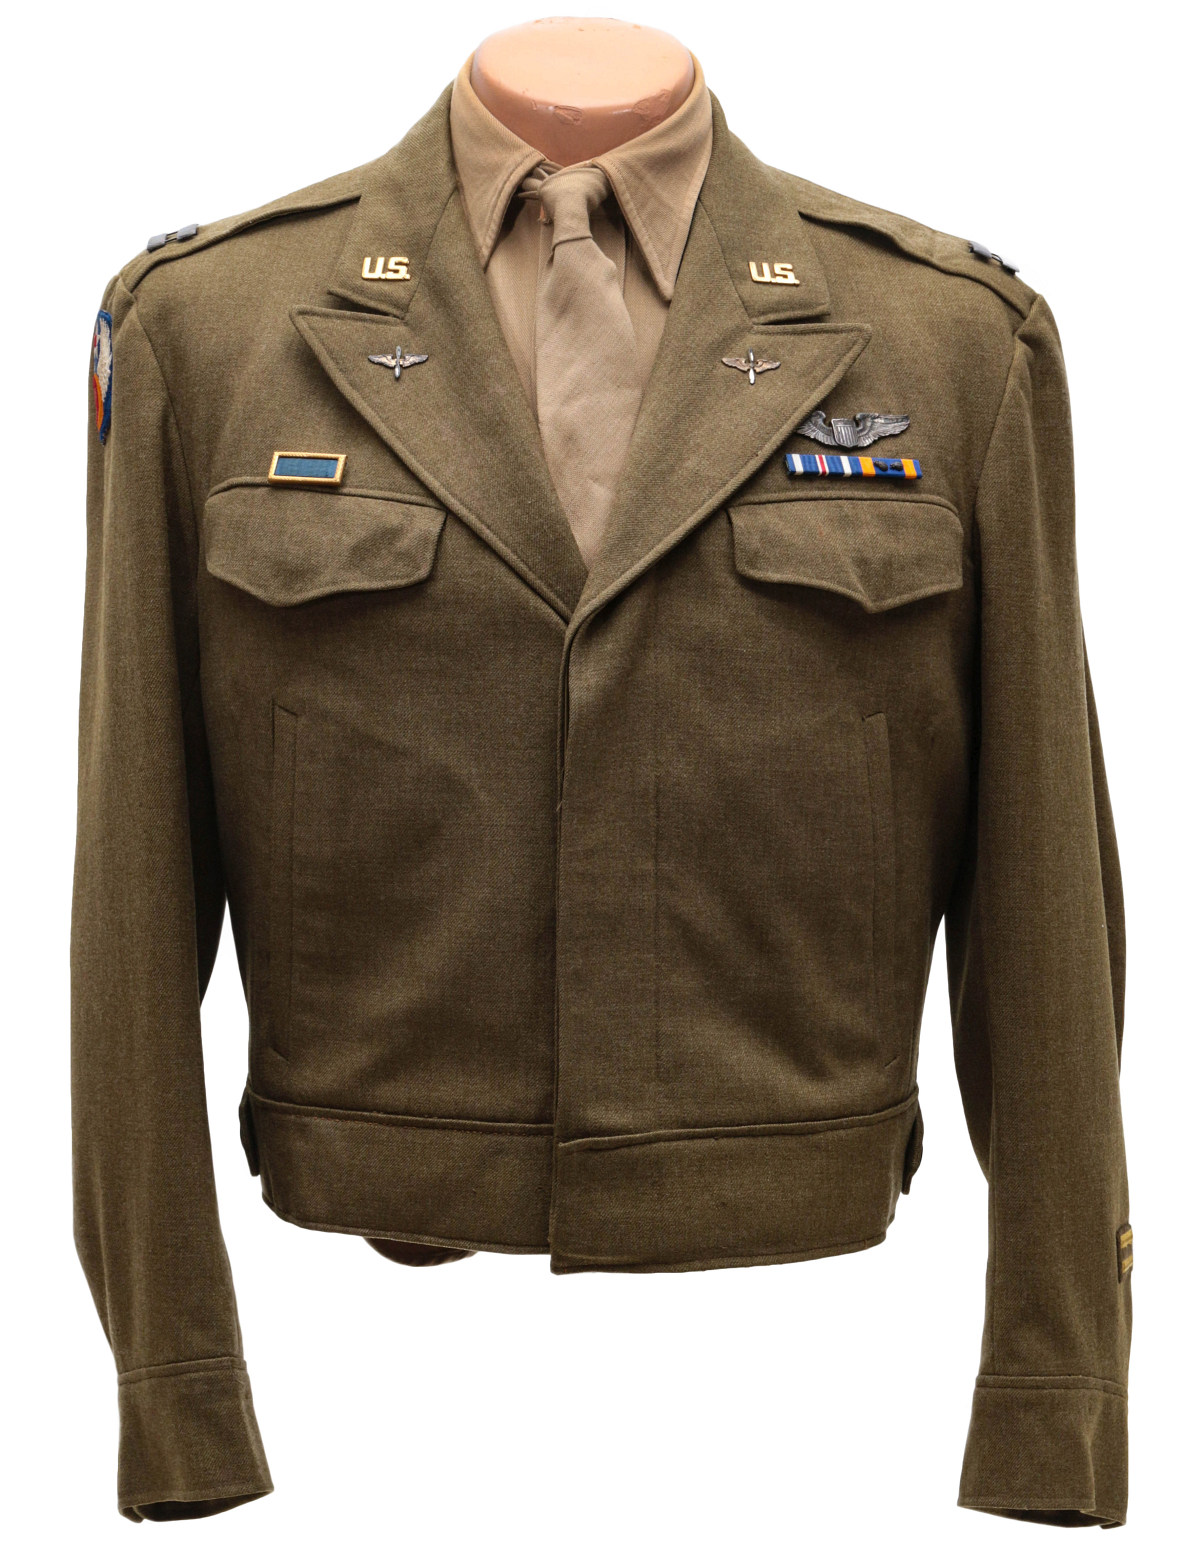 UNIDENTIFIED CAPT AND SERGEANT'S AAF IKE UNIFORMS